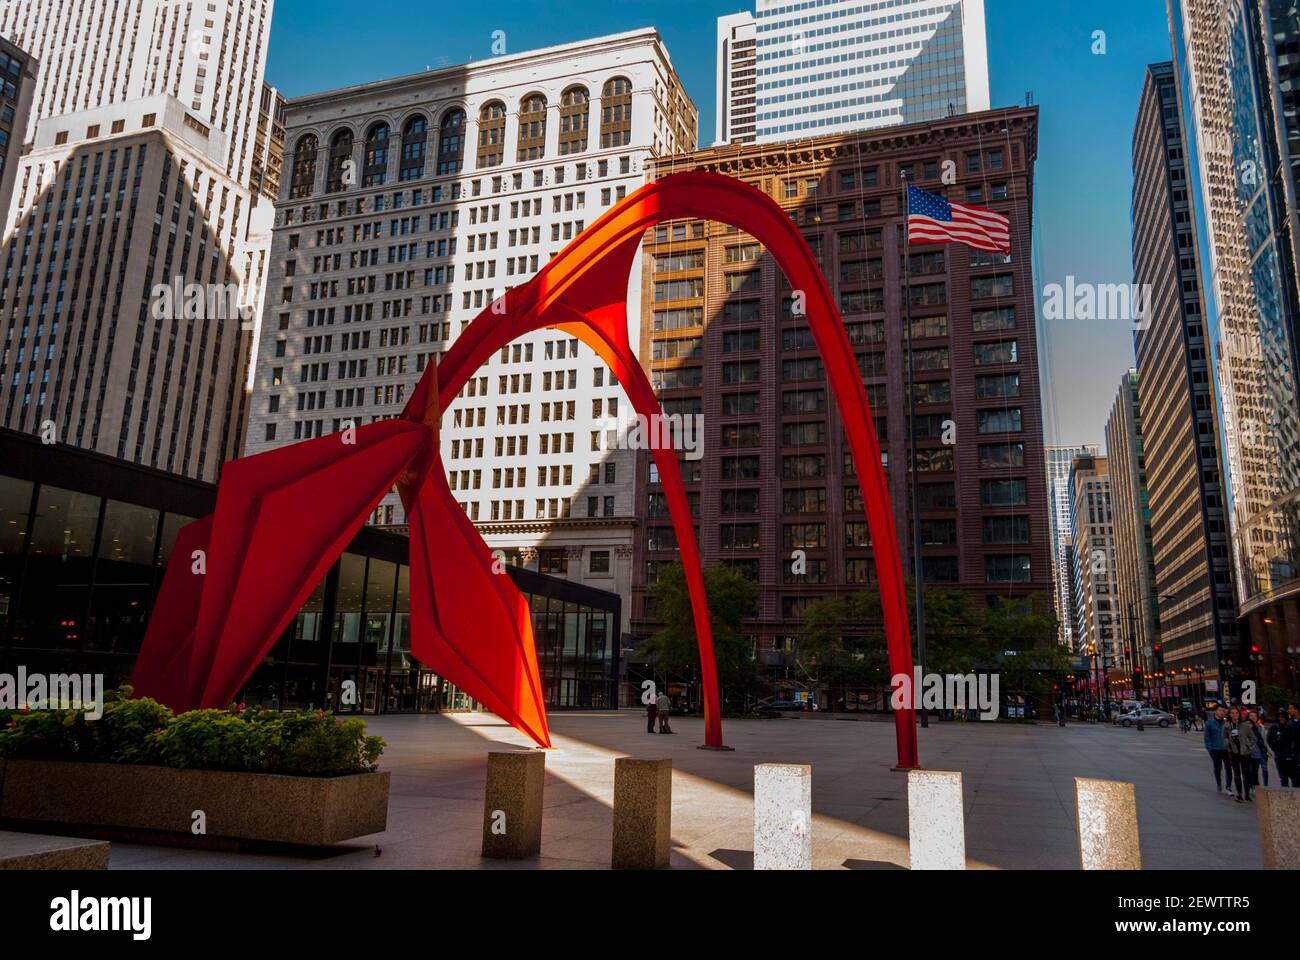 Calder's Flamingo or stabile, was unveiled to the public in 1974.it is situated at 50 W Adams St, Chicago, IL 60610 Stock Photo